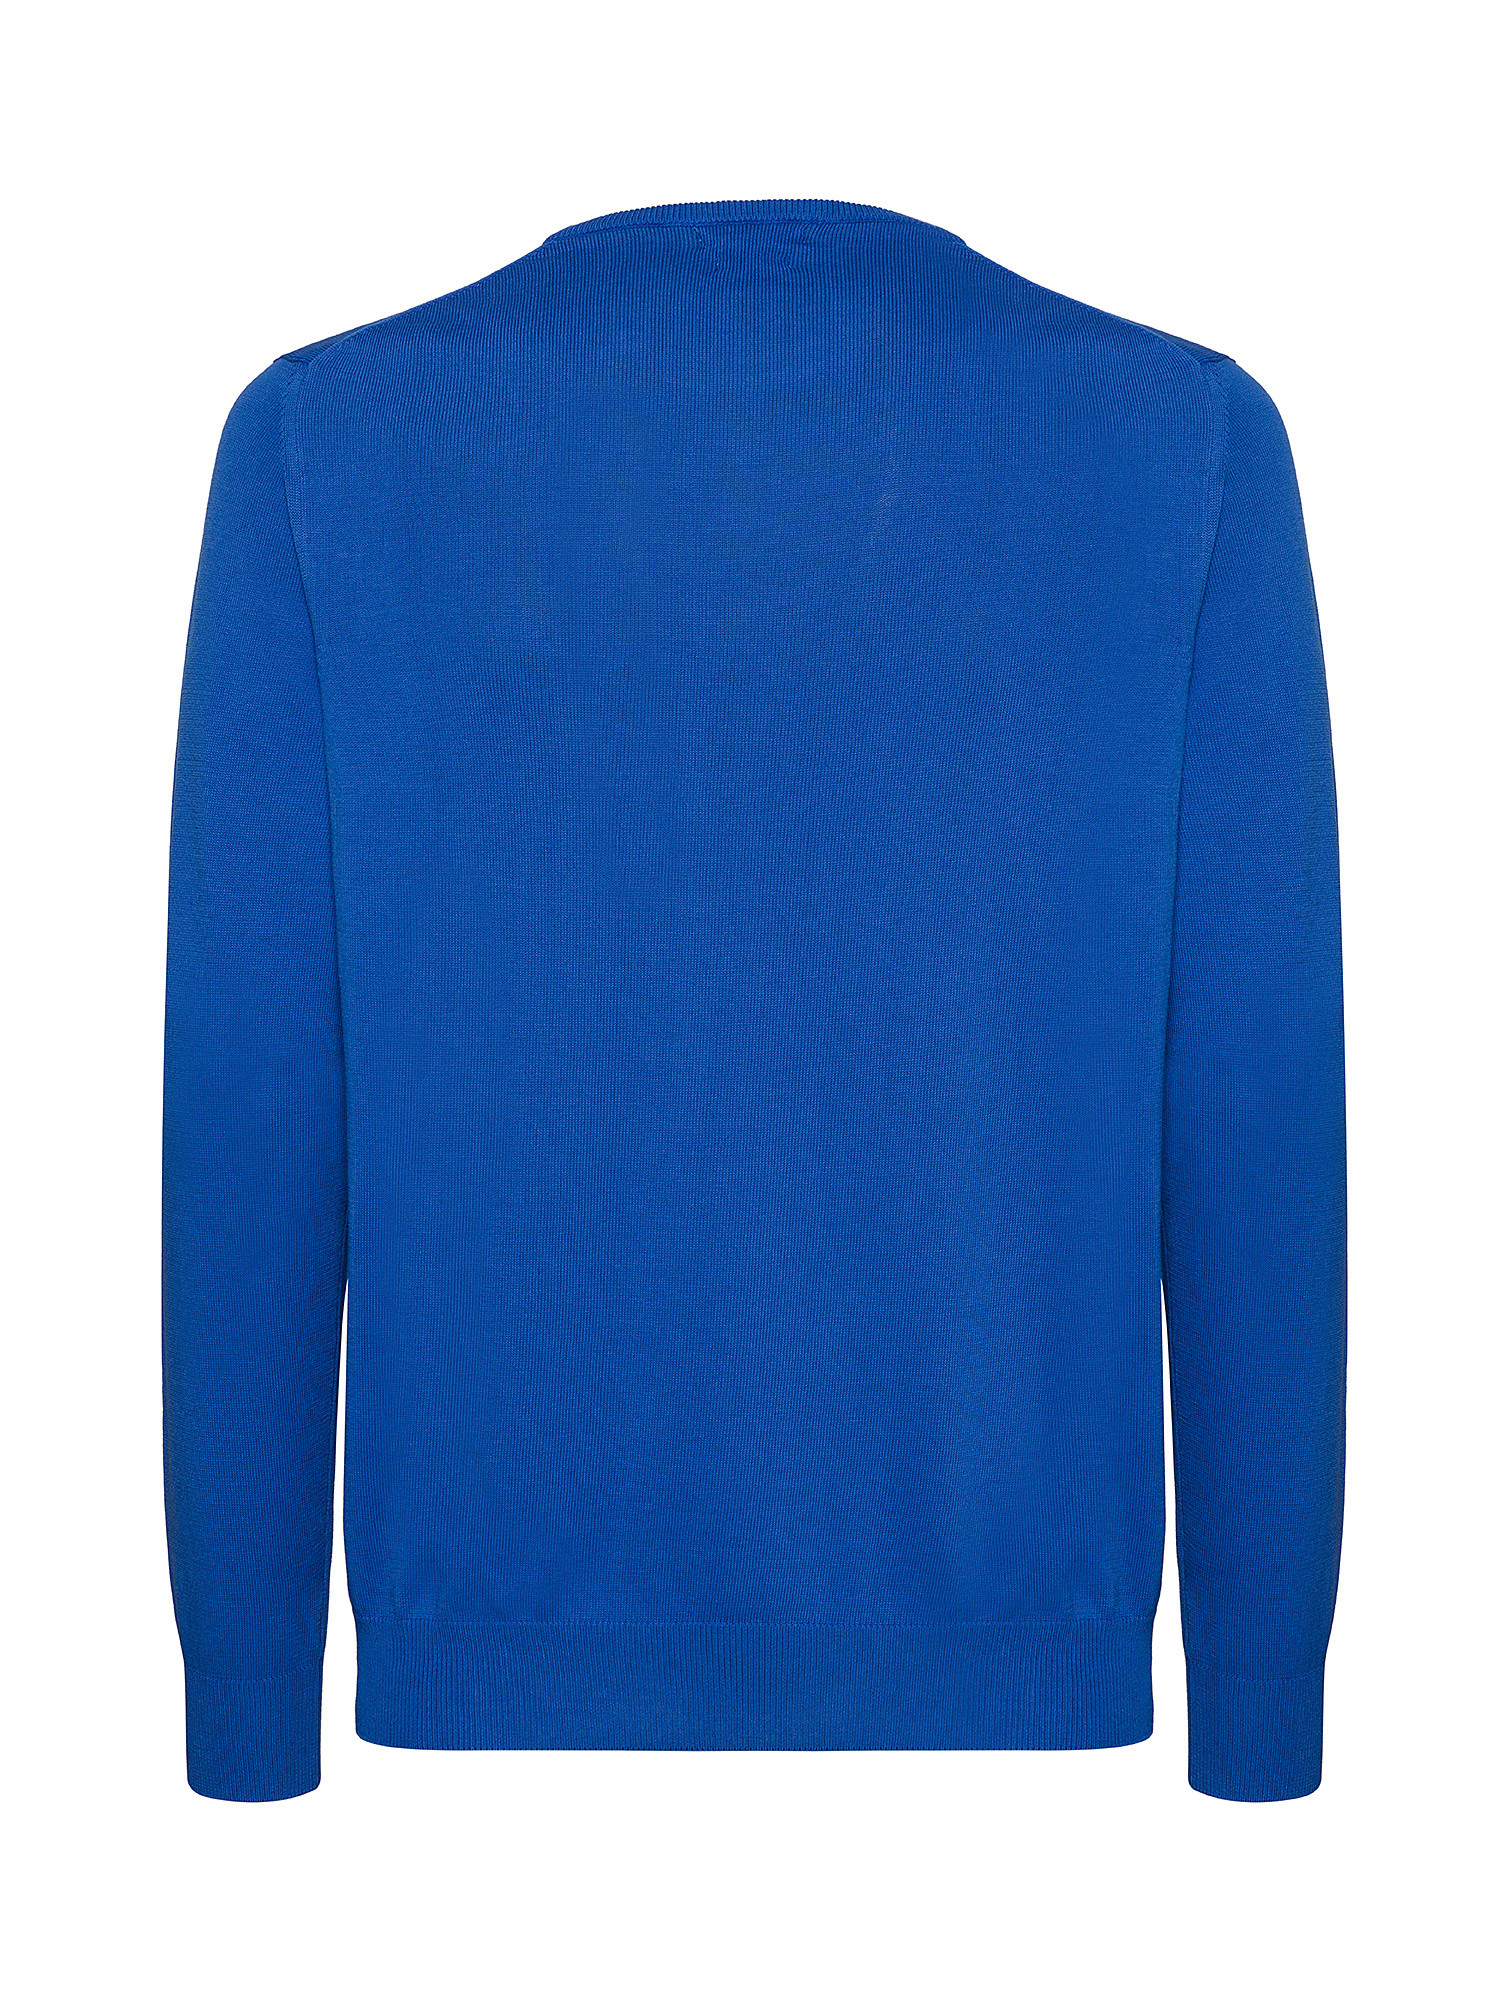 Luca D'Altieri - Crew neck sweater in extrafine pure cotton, Royal Blue, large image number 1